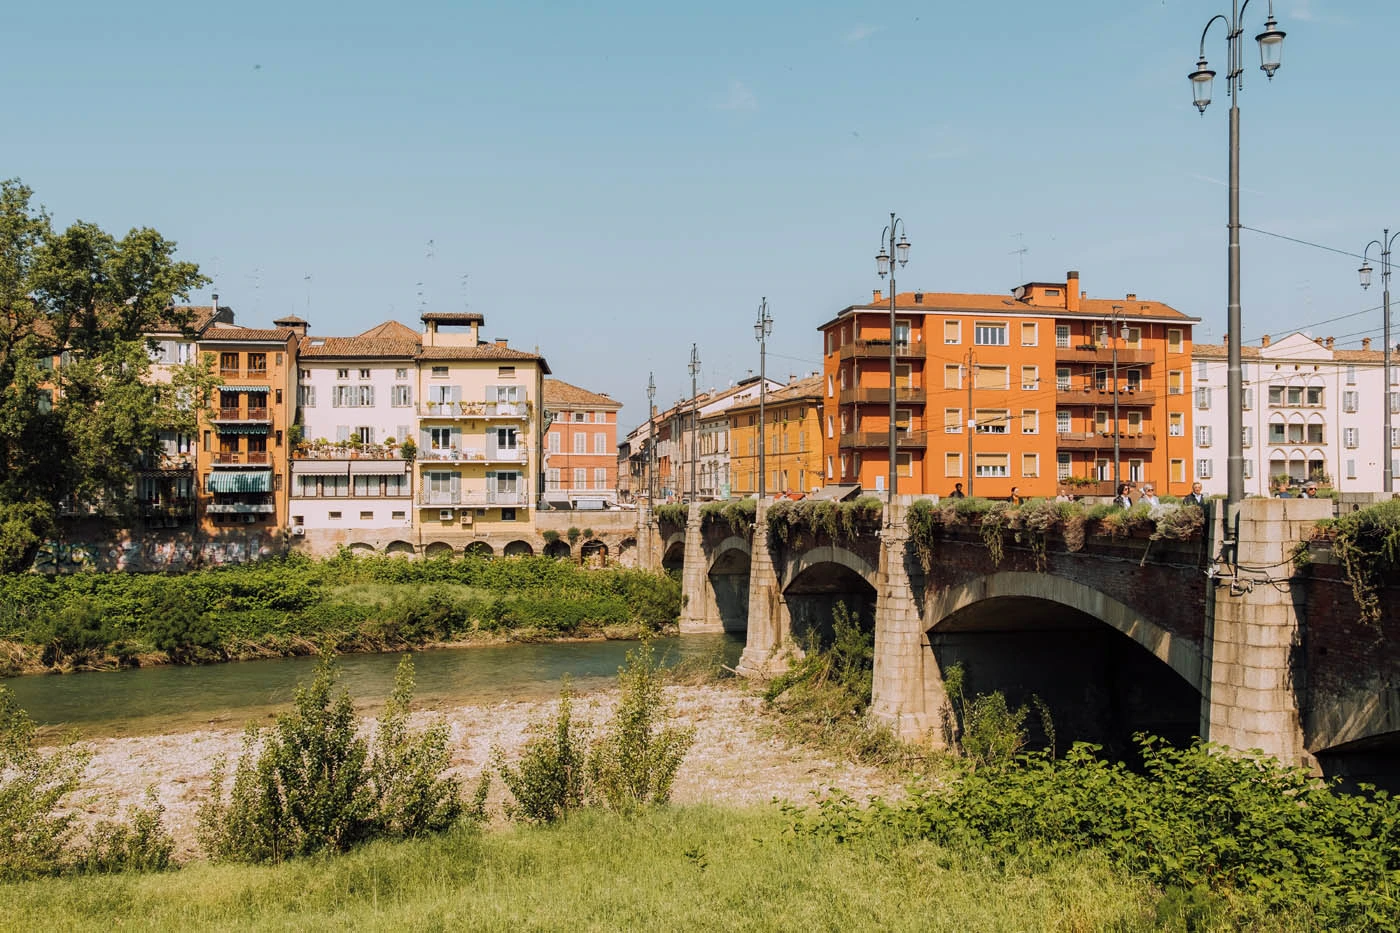 BEST Things to do in Parma Italy - Ponte di Mezzo